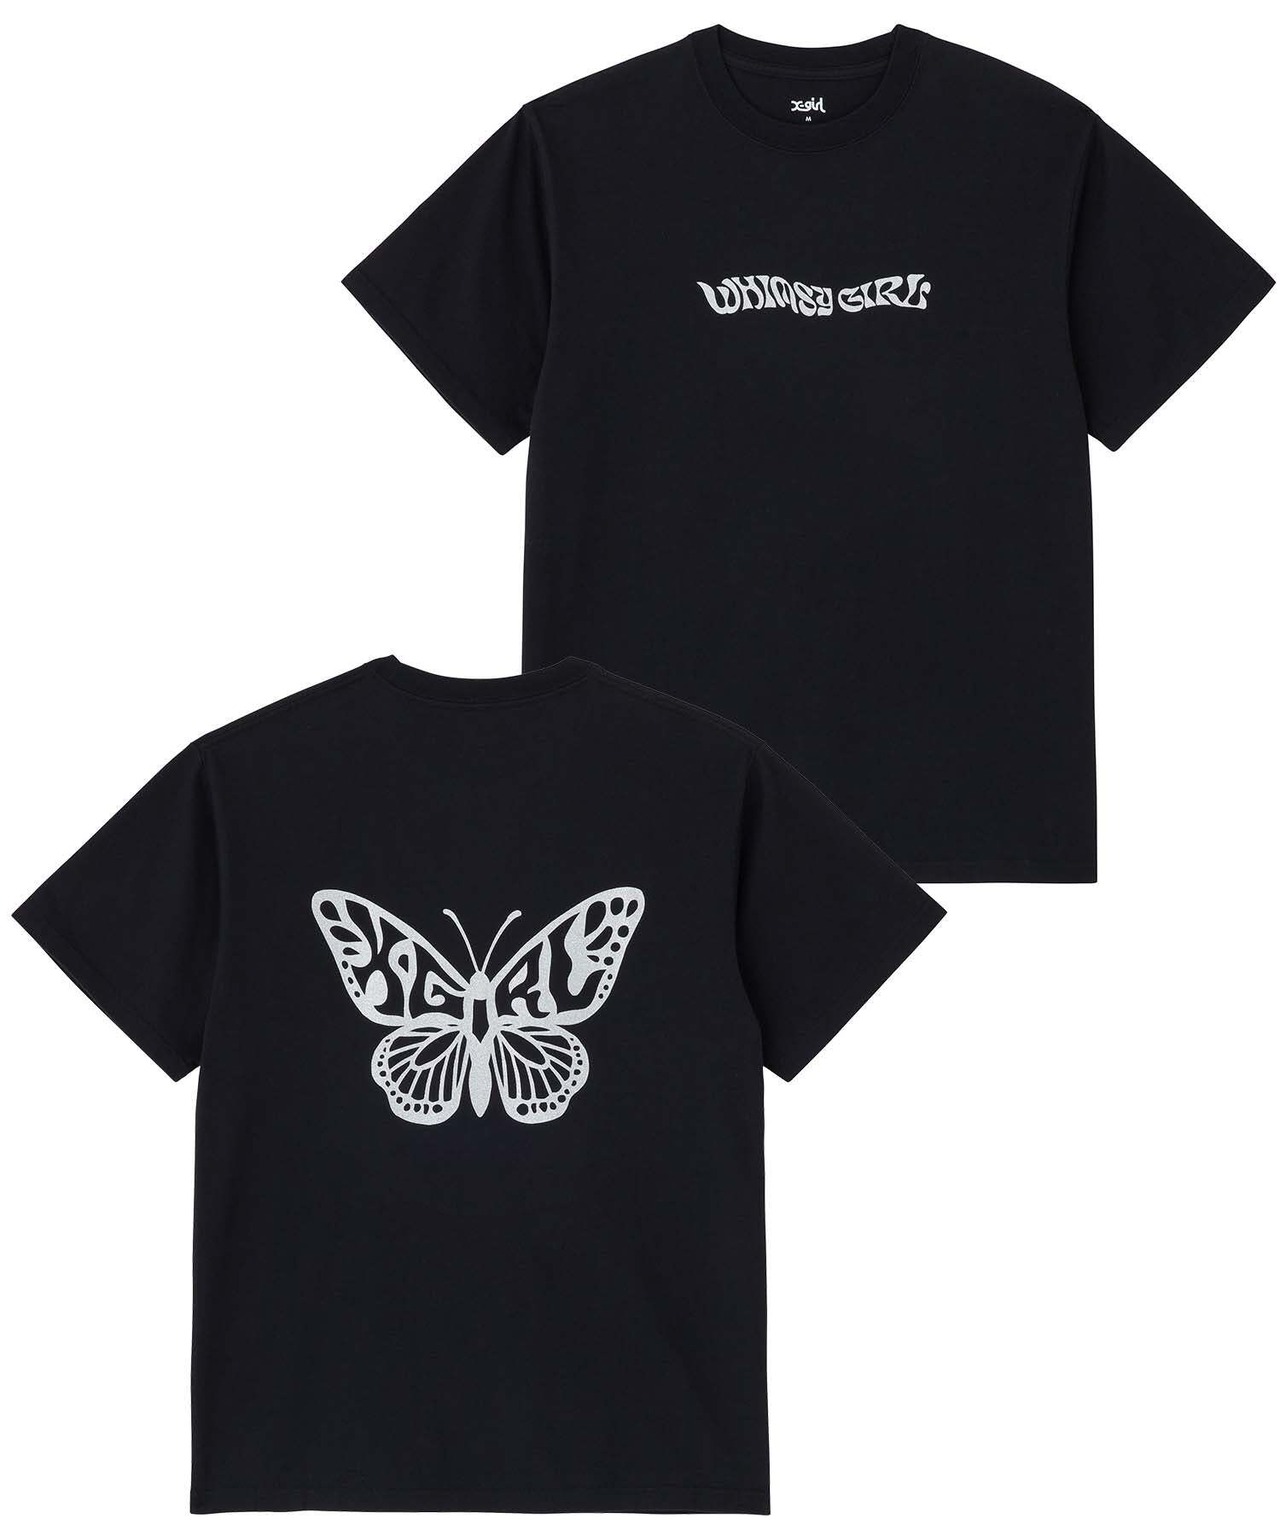 【X-girl】GLITTER BUTTERFLY LOGO S/S TEE【エックスガール】